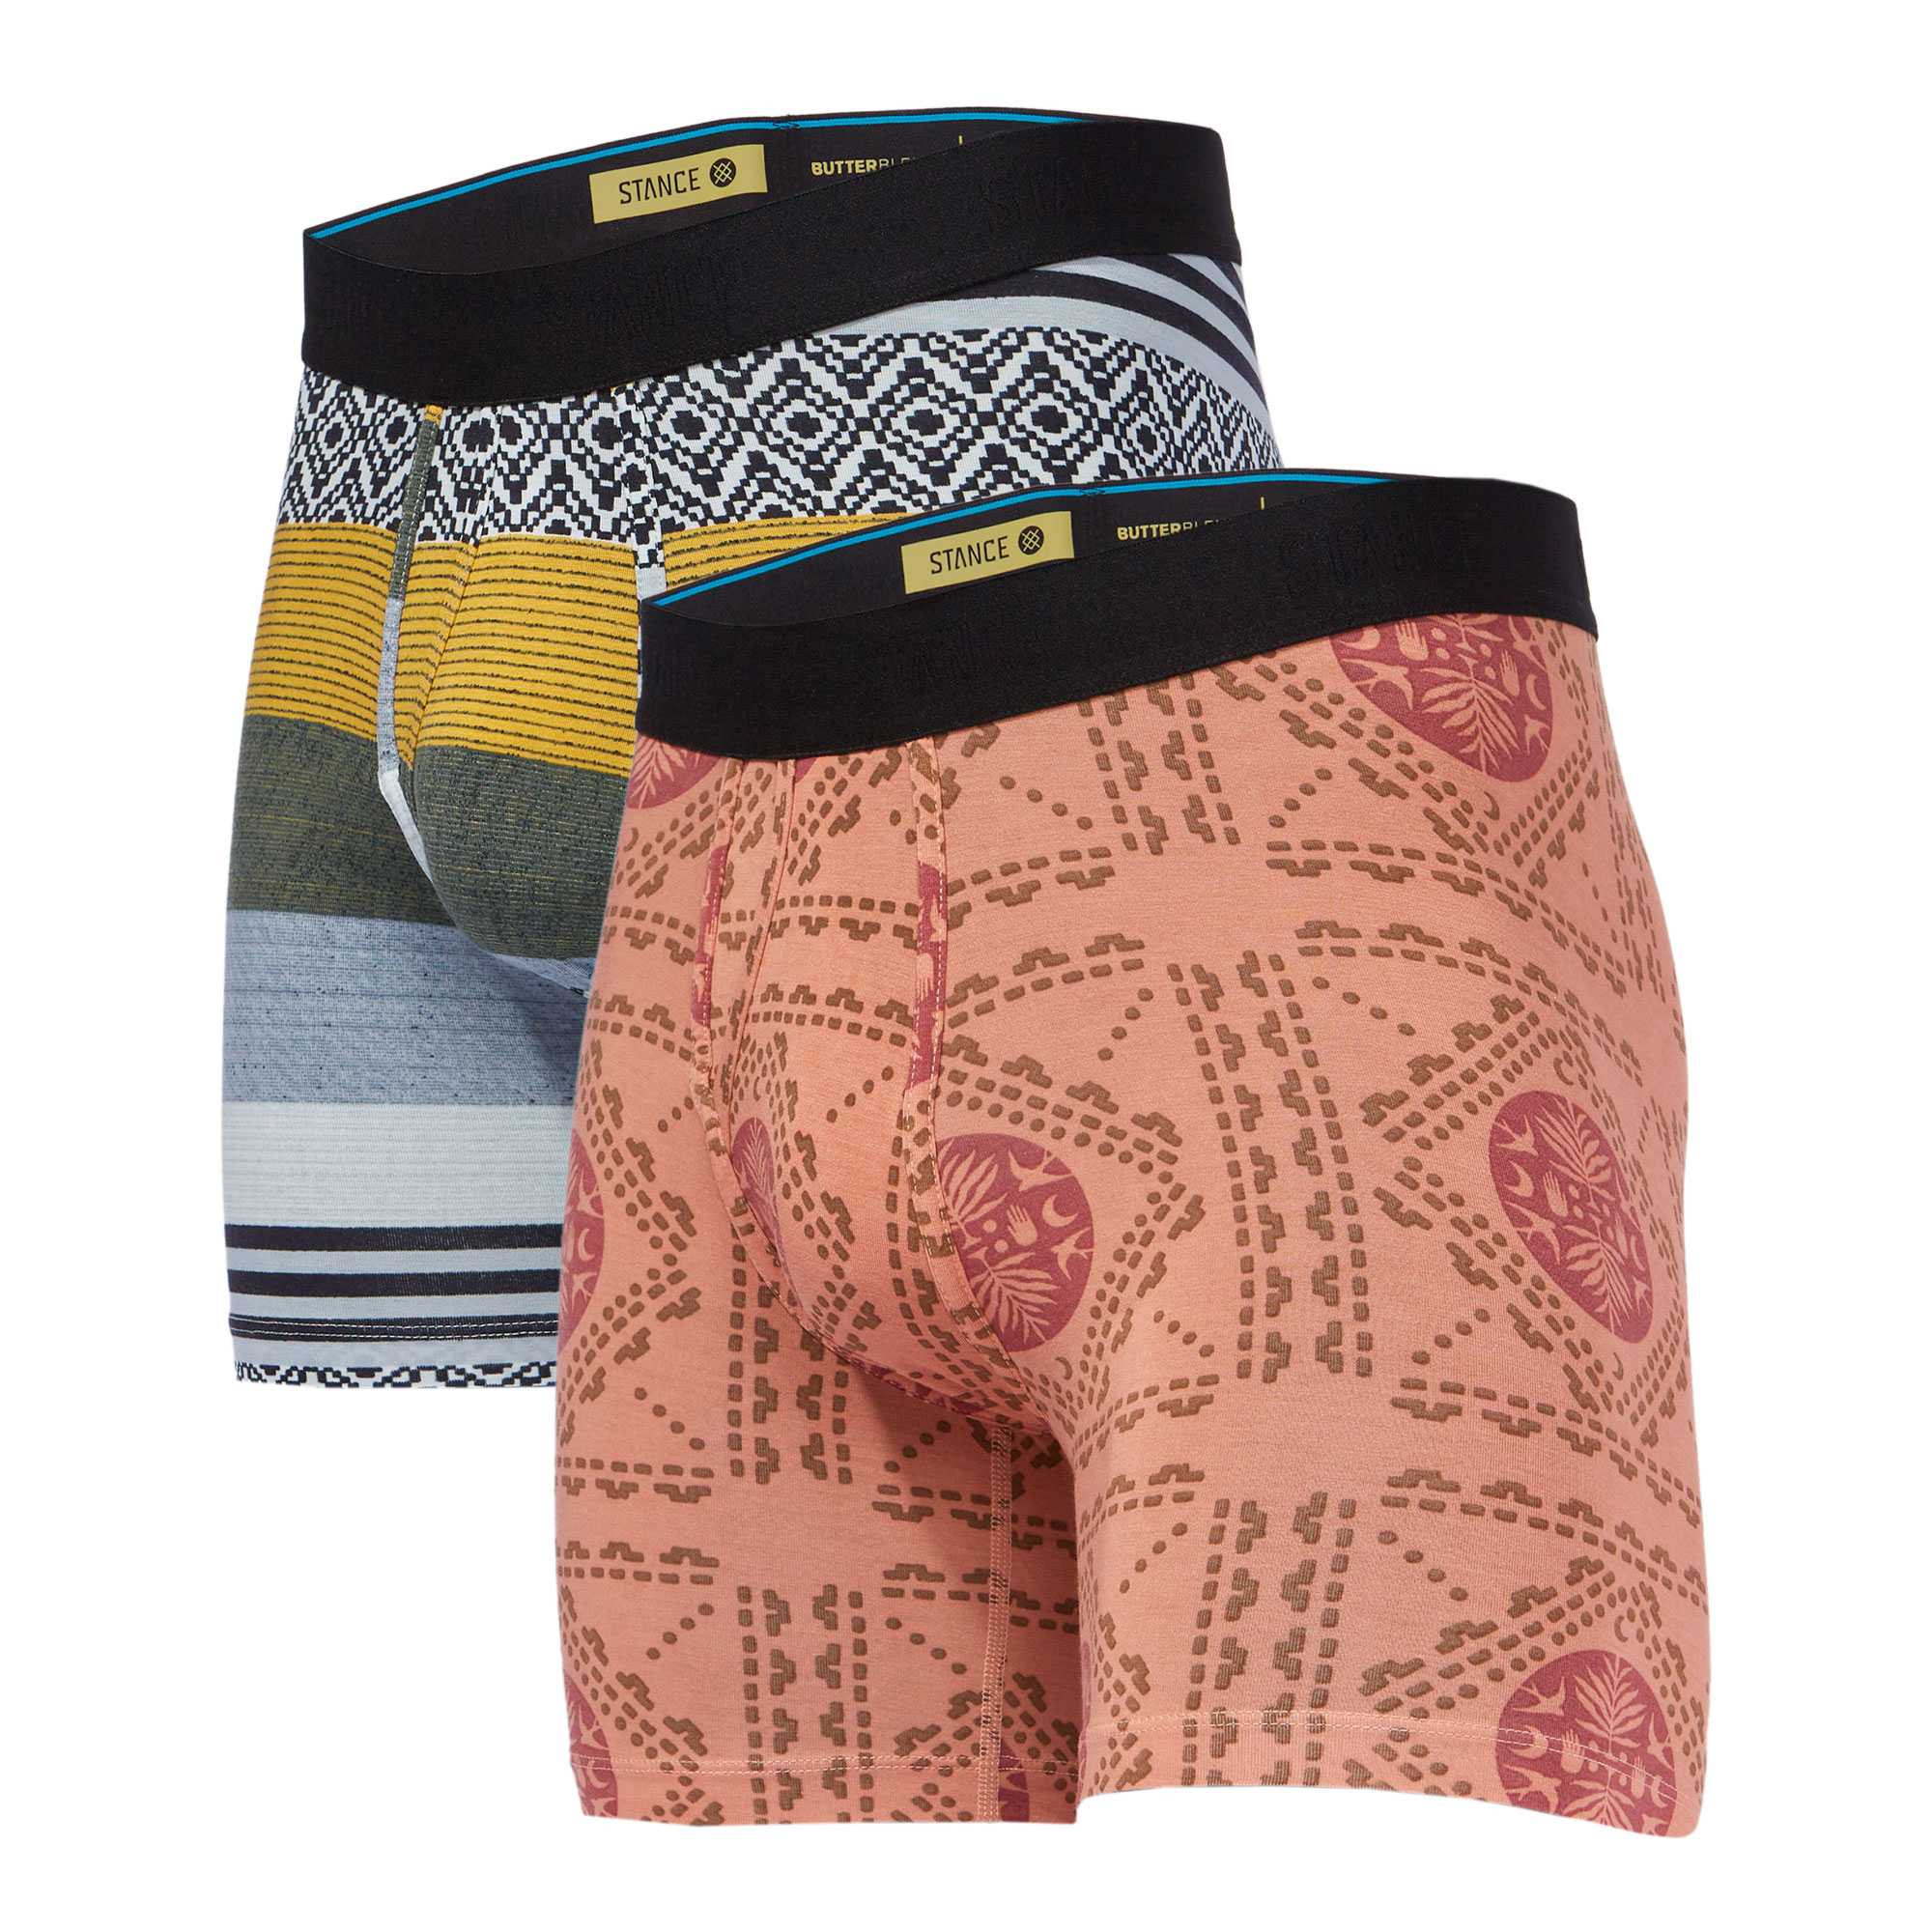 Sunnyside Wholester Boxers for Men – Half-Moon Outfitters